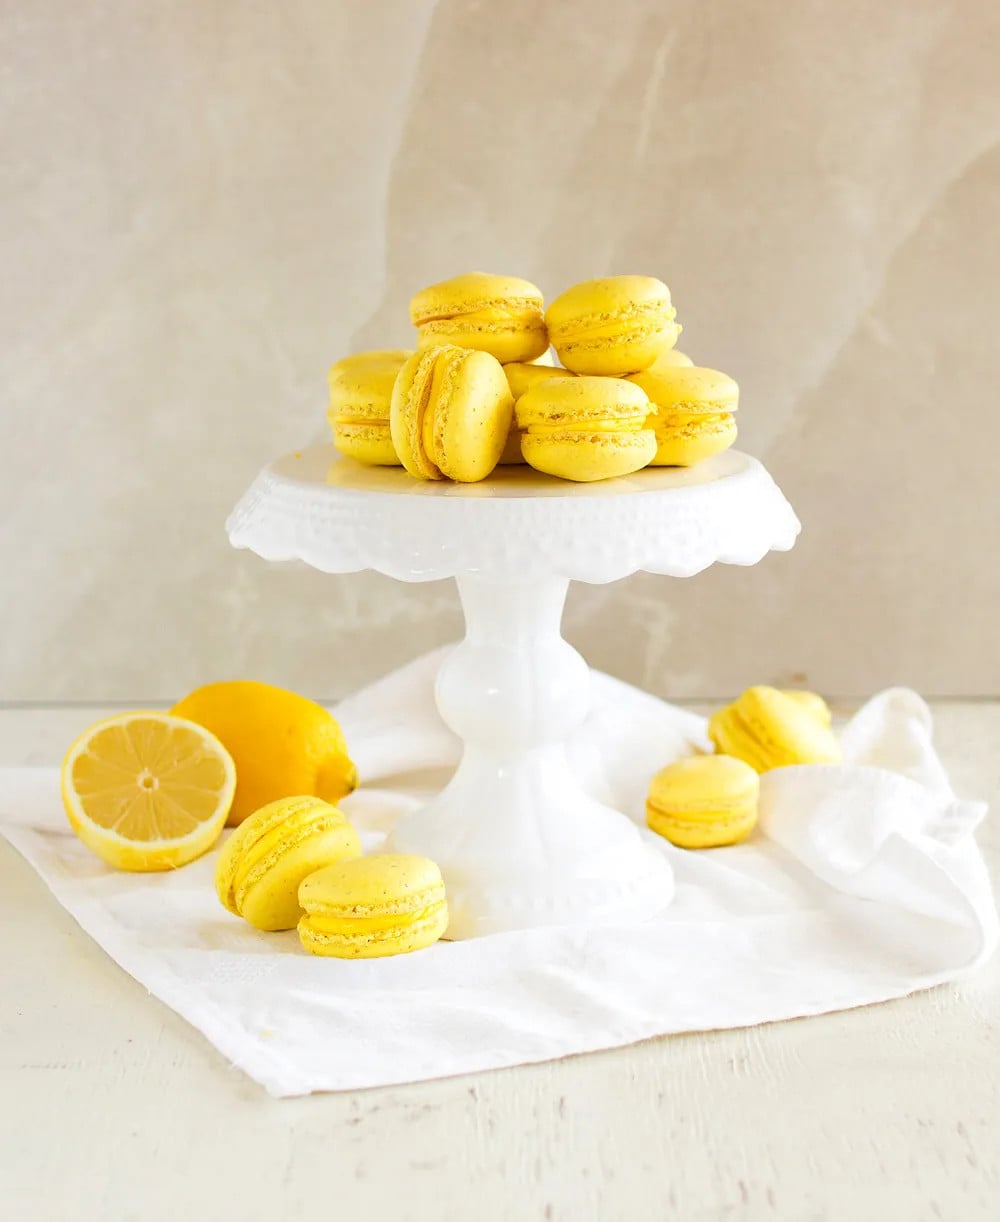 French Macarons with Lemon Buttercream Filling